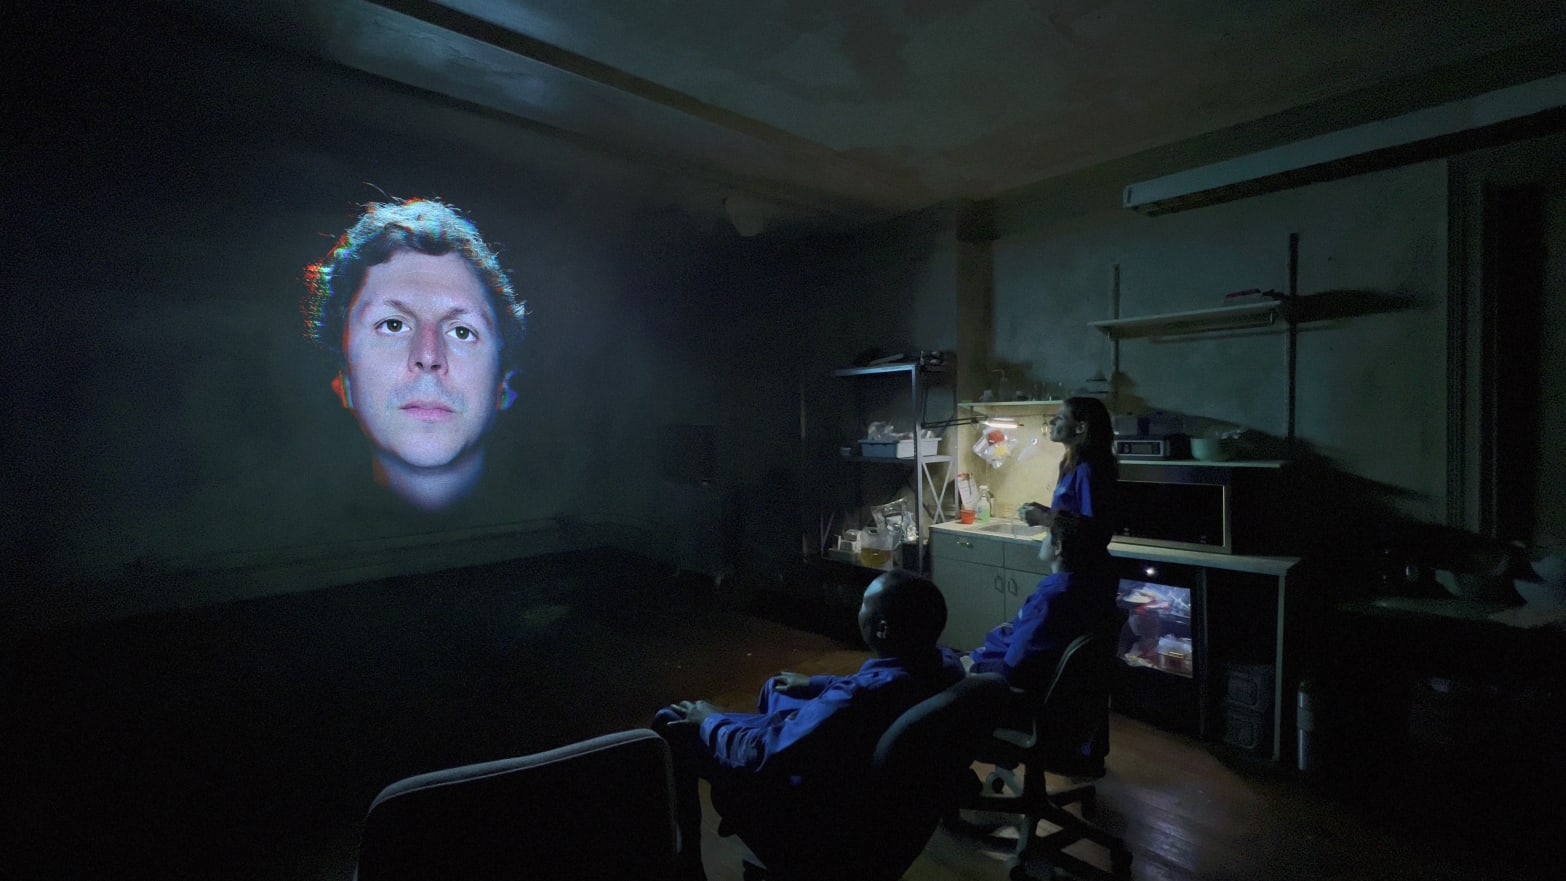 Michael Cera’s disembodied head on a screen, staring straight ahead, as three people sit in armchairs in a dark room below.